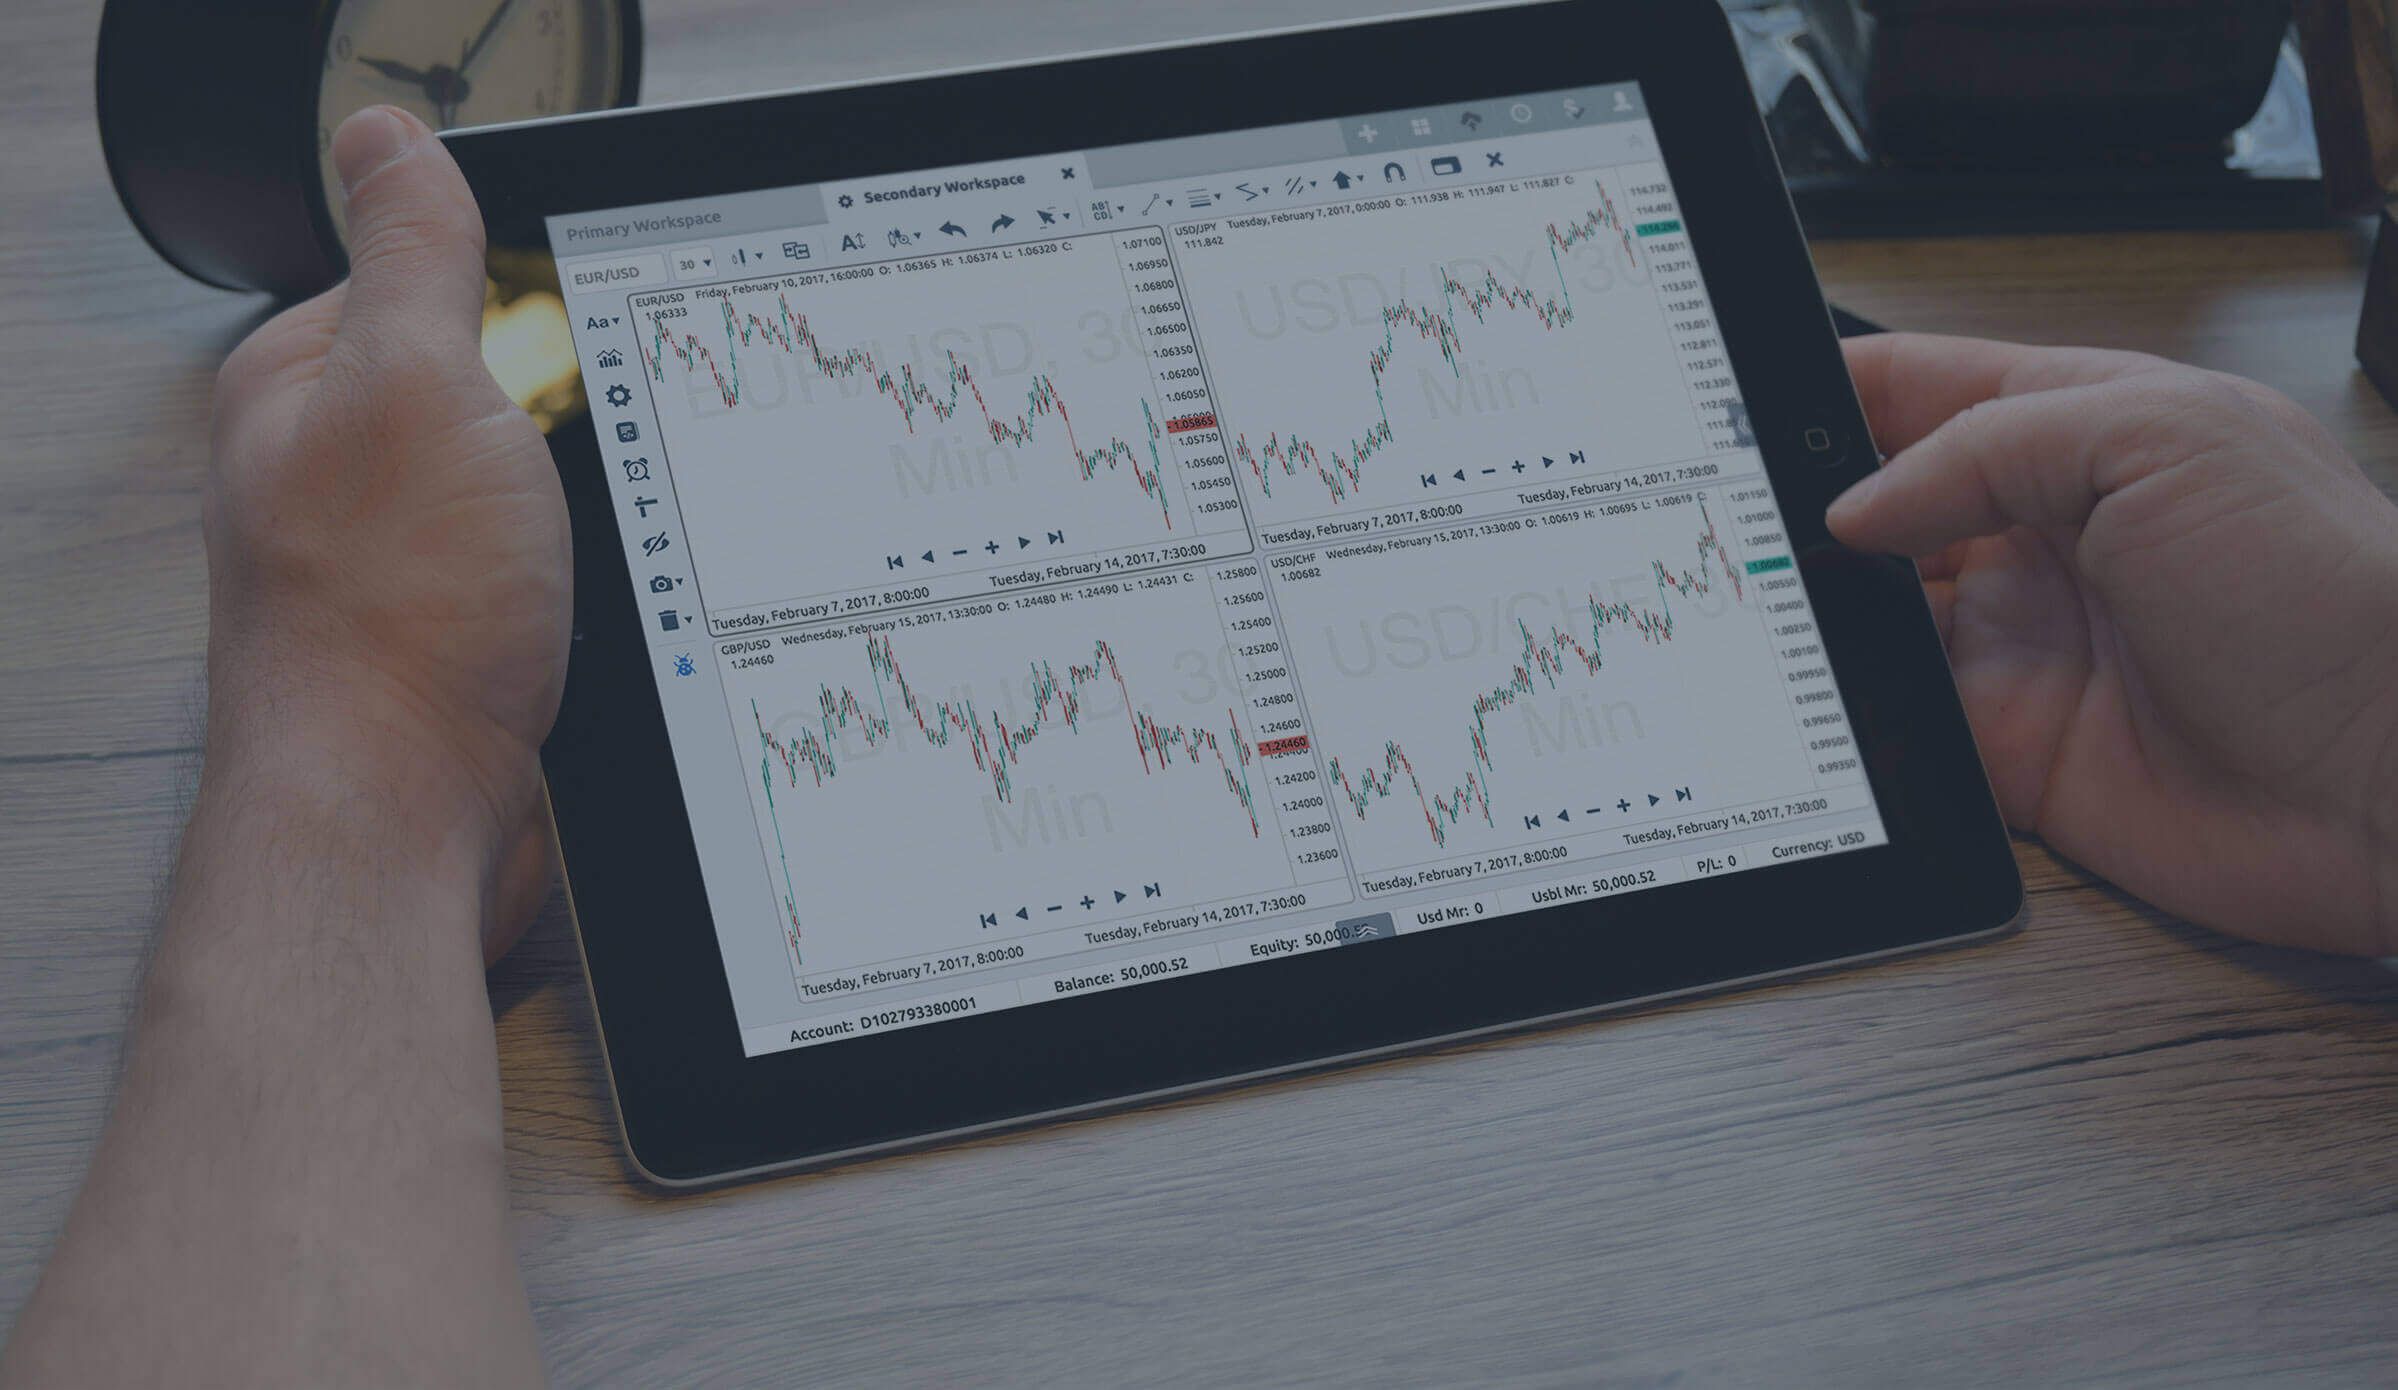 Smart Charts Learn To Trade Review